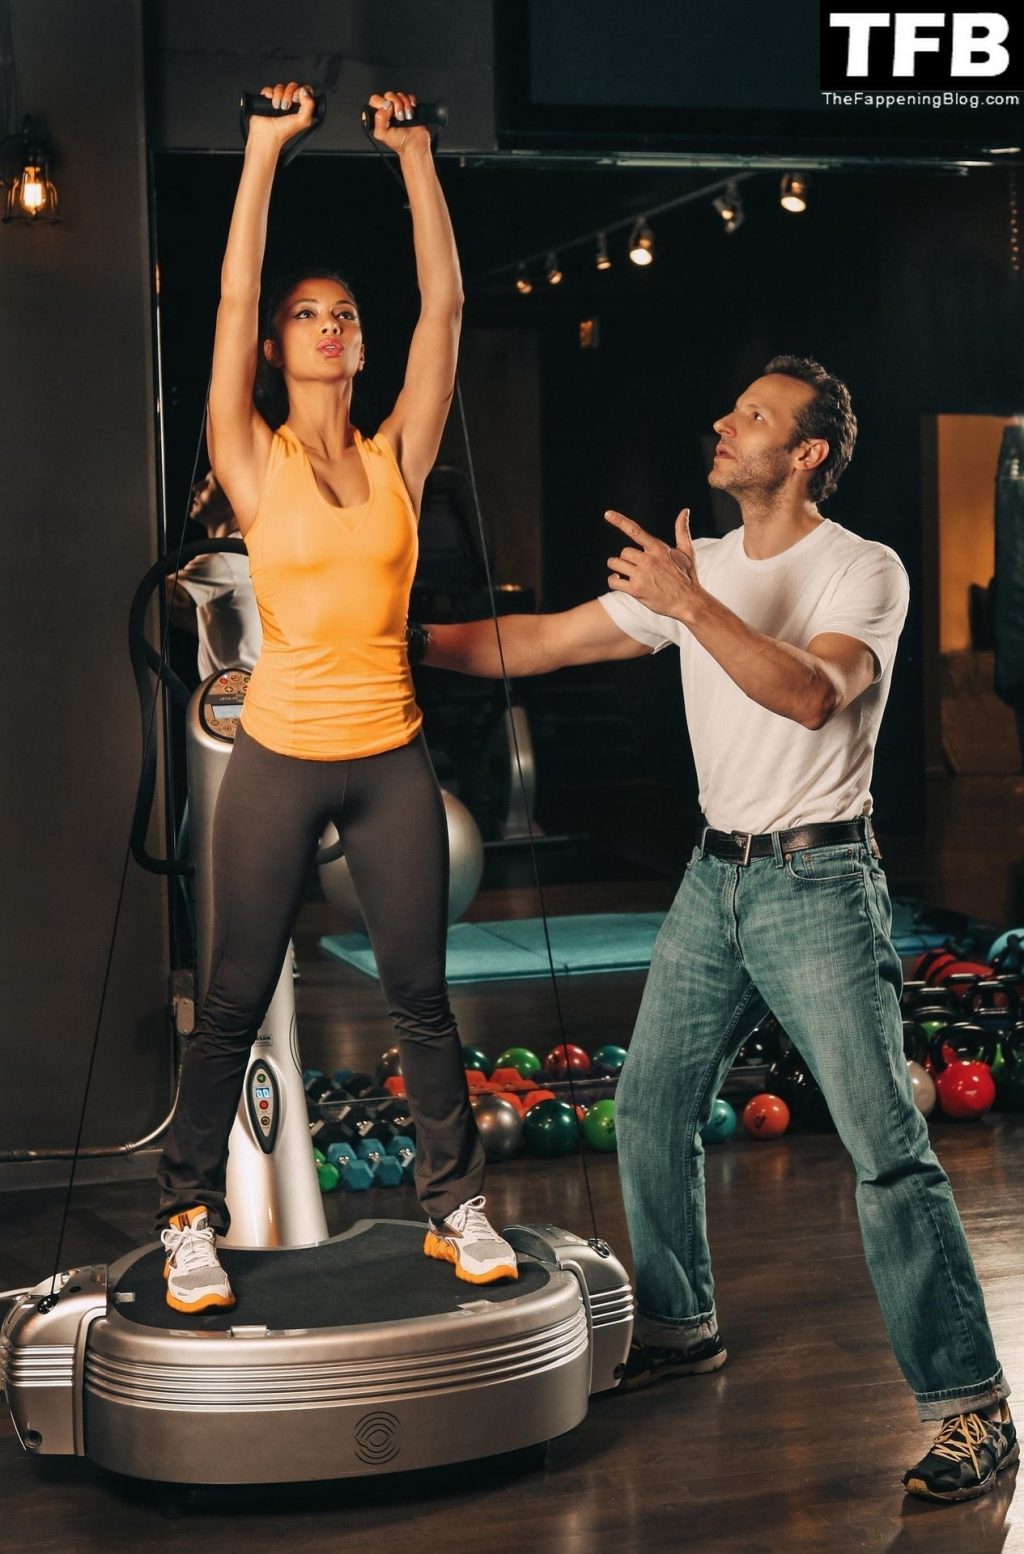 Busty Nicole Scherzinger Works Out With a Personal Trainer (10 Photos)